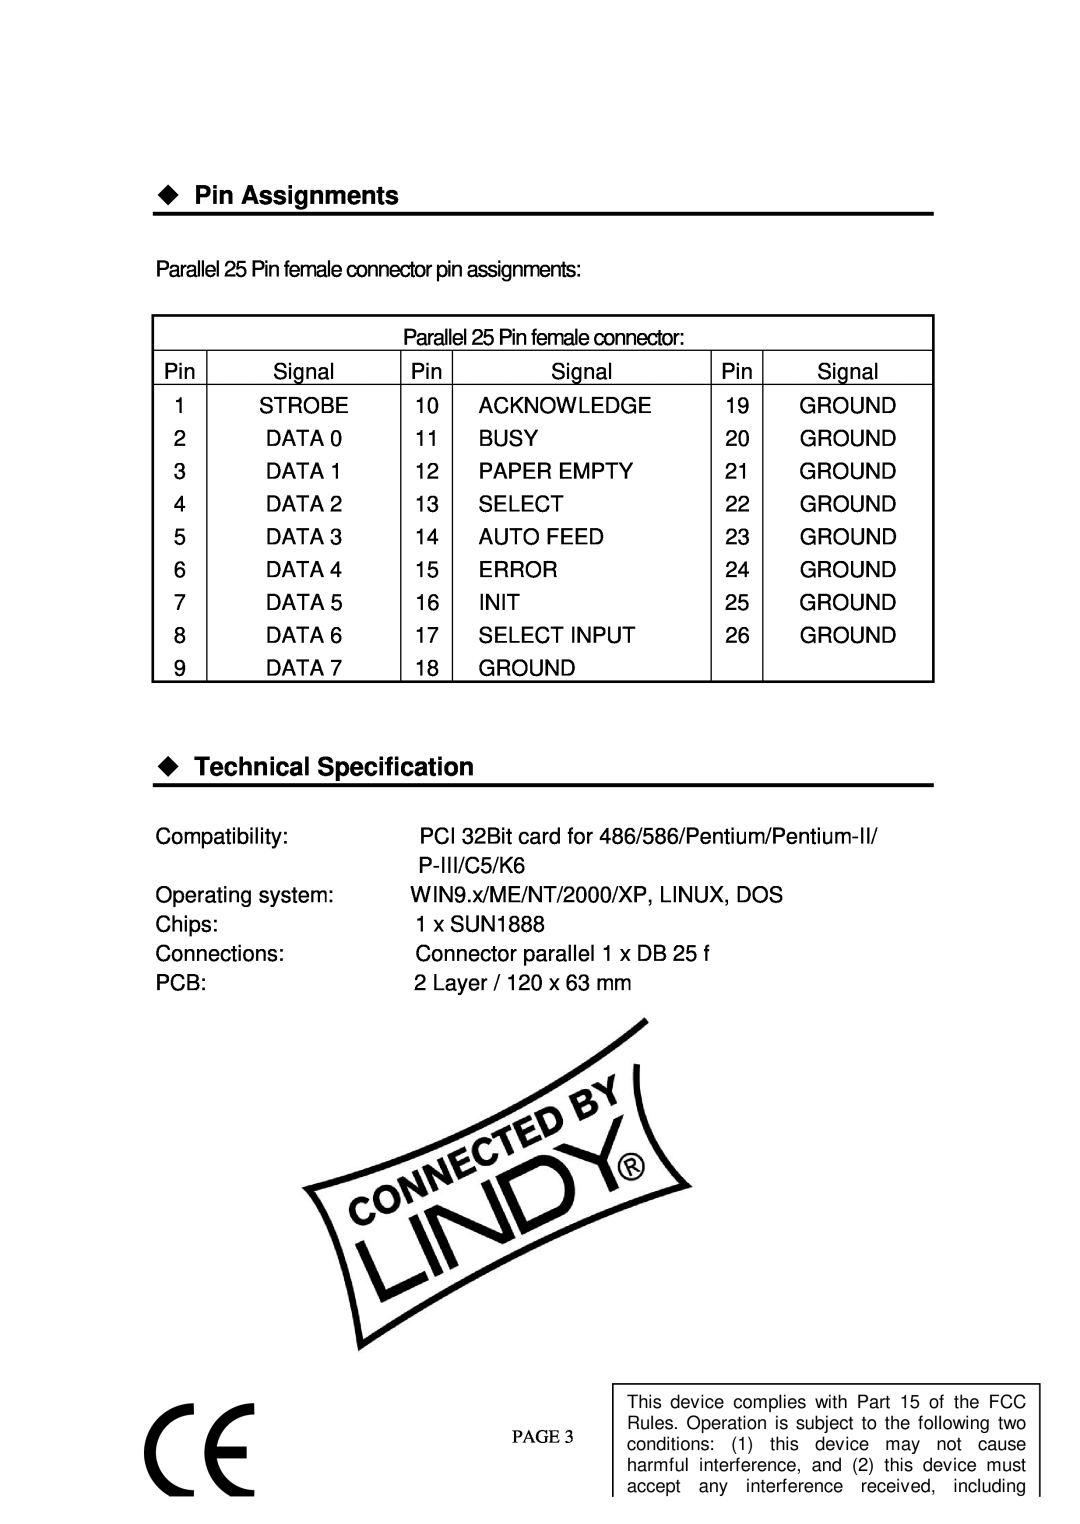 Lindy 70582 manual Pin Assignments, Technical Specification 